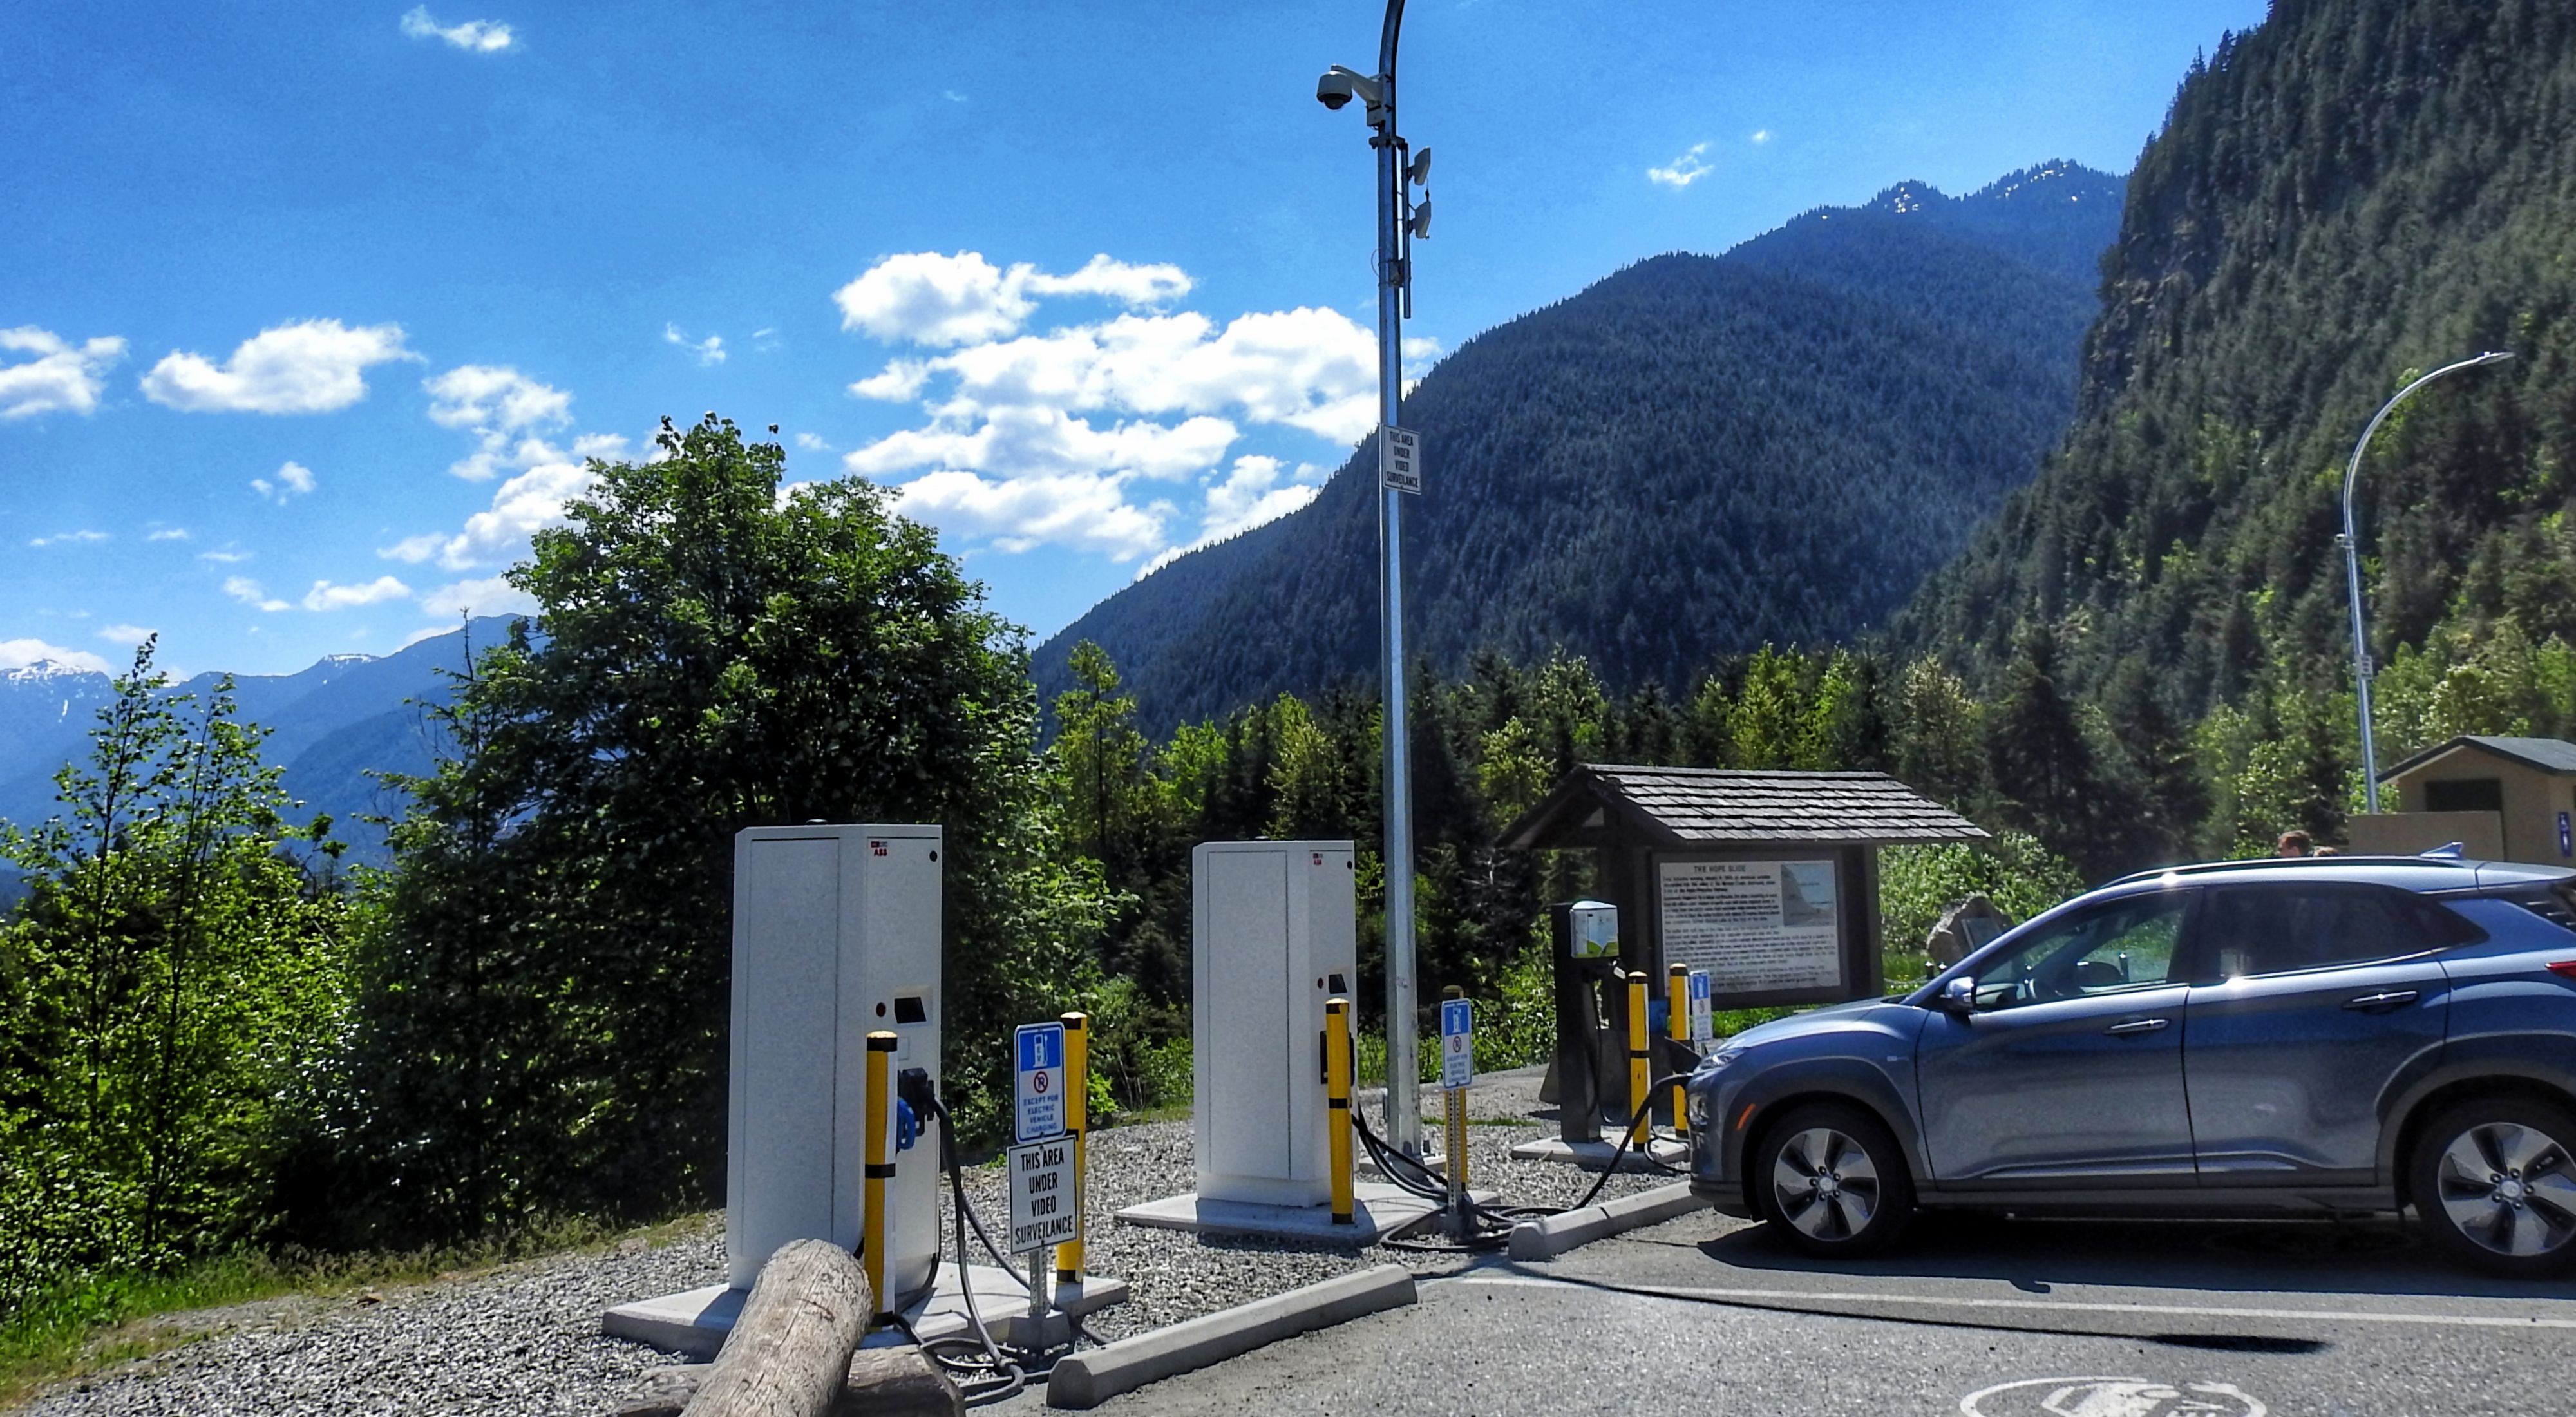 An electric vehicle is at a charging station at a scenic mountainous location in British Columbia.